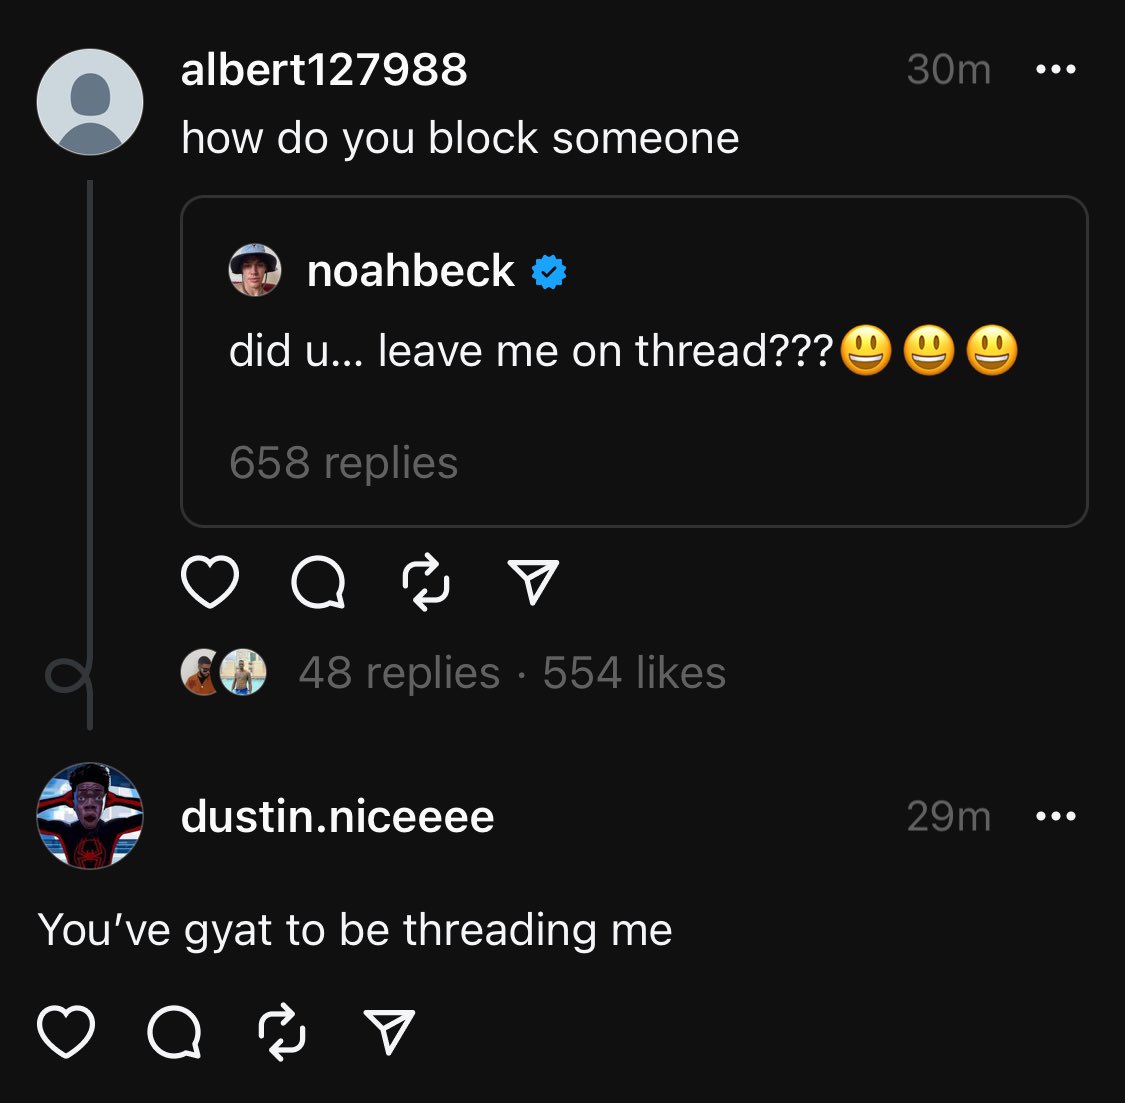 best threads of the week - screenshot - albert127988 how do you block someone noahbeck did u... leave me on thread??? 658 replies a 2 48 replies 554 dustin.niceeee D You've gyat to be threading me a B 30m 8 00 29m ... ...